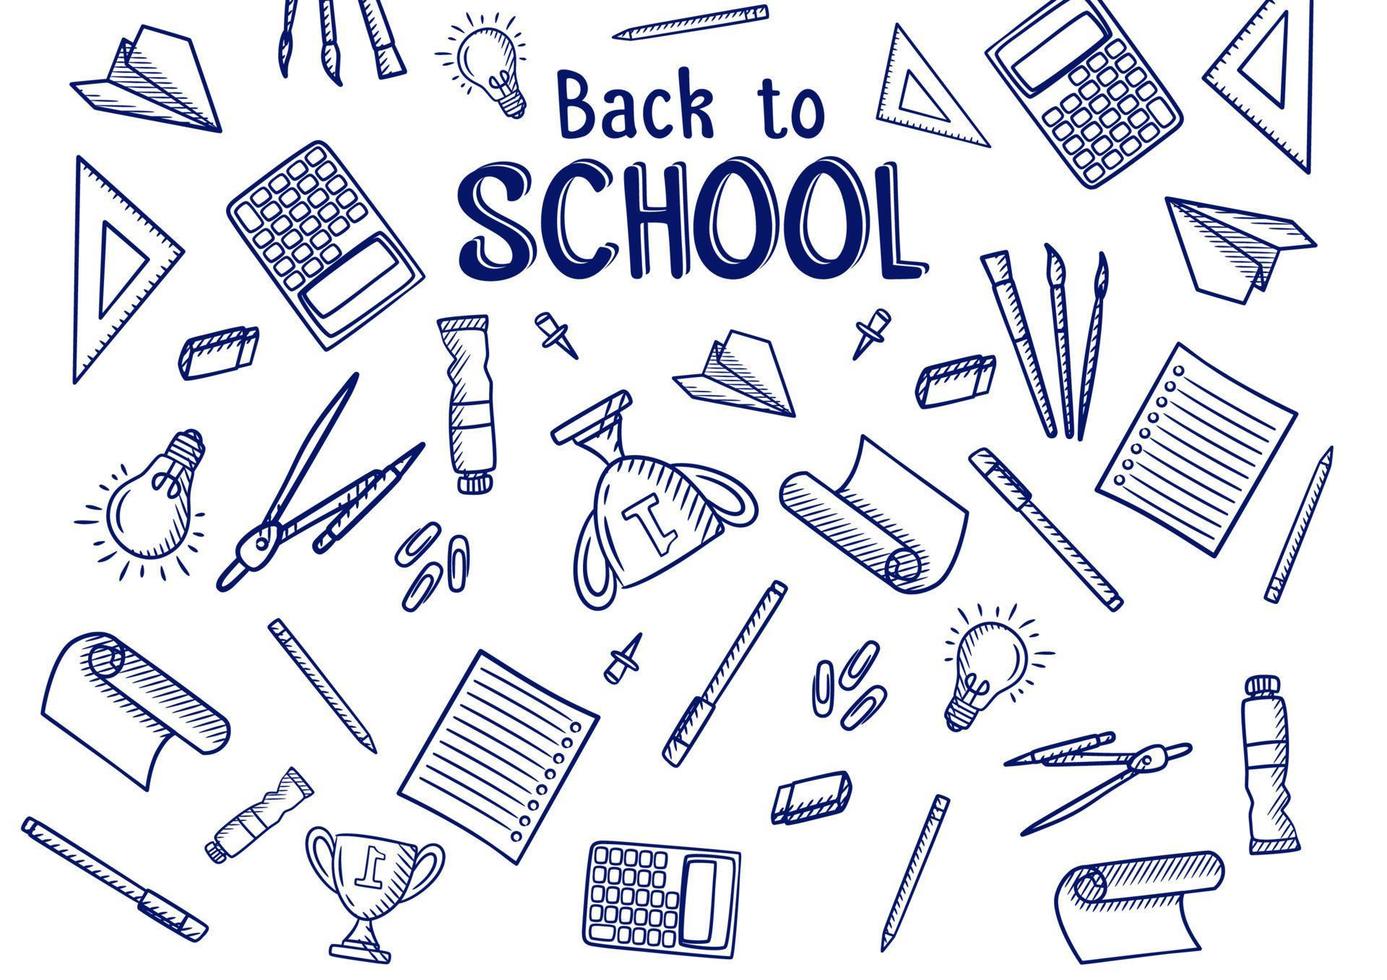 Hand drawn back to school vector banner background